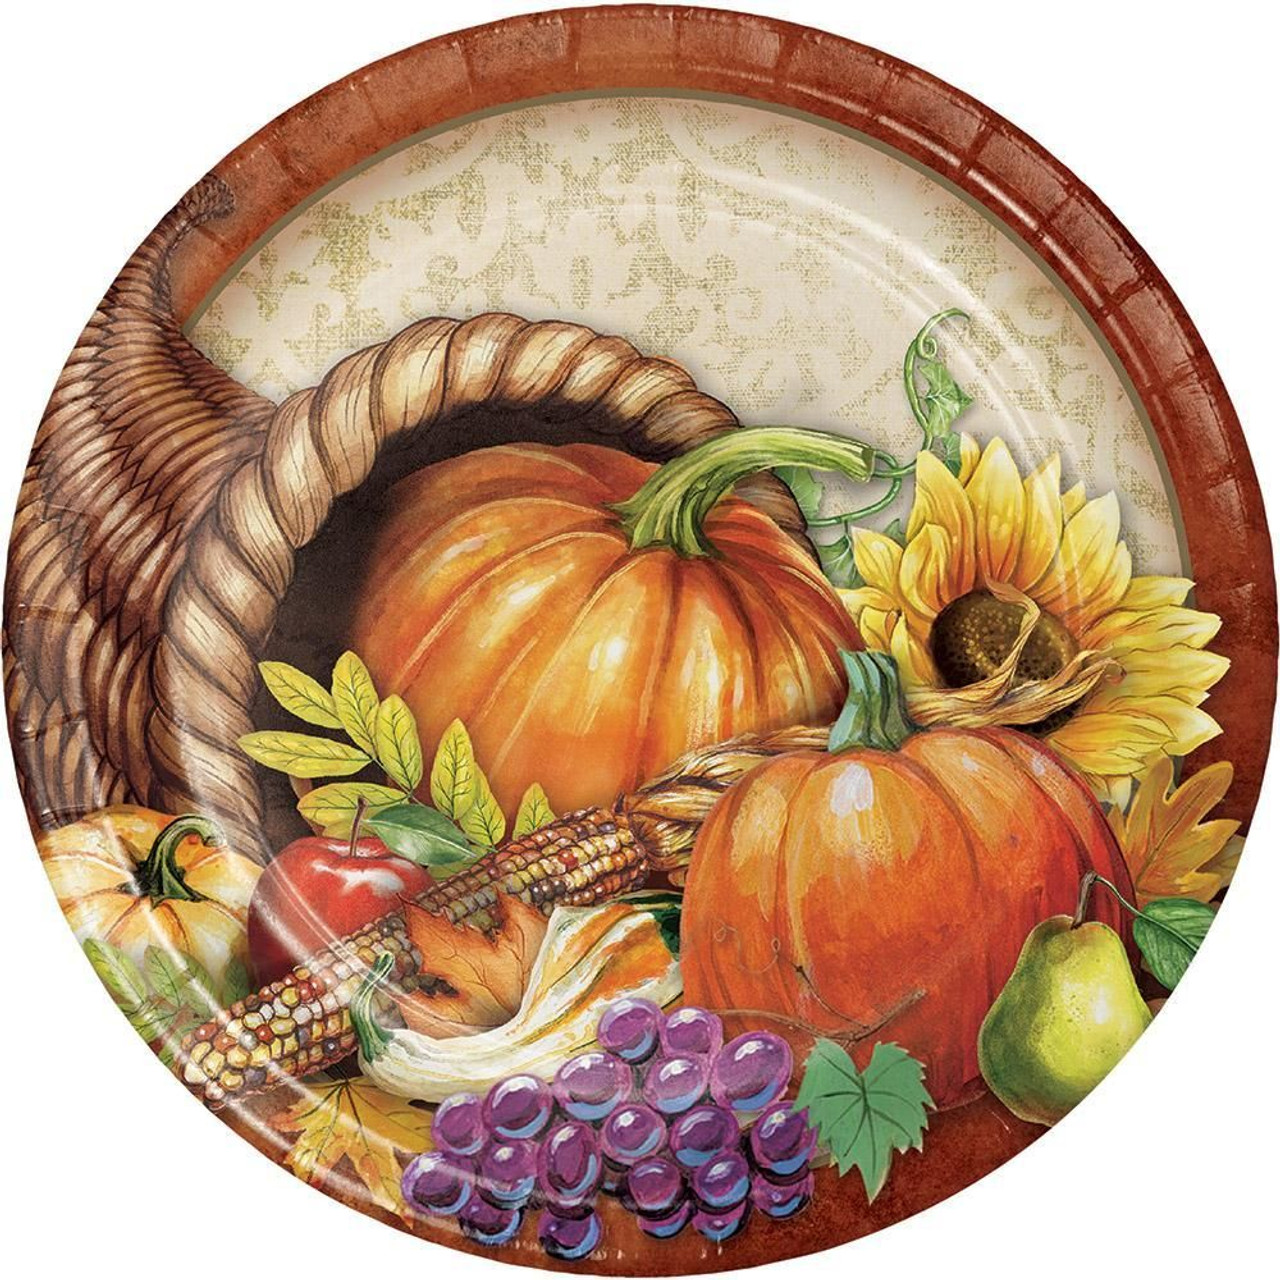 https://cdn11.bigcommerce.com/s-hgqmwywp99/images/stencil/1280x1280/products/49550/44339/bountiful-thanksgiving-9-dinner-paper-plates-8ct-6__11332.1675880335.jpg?c=1?imbypass=on